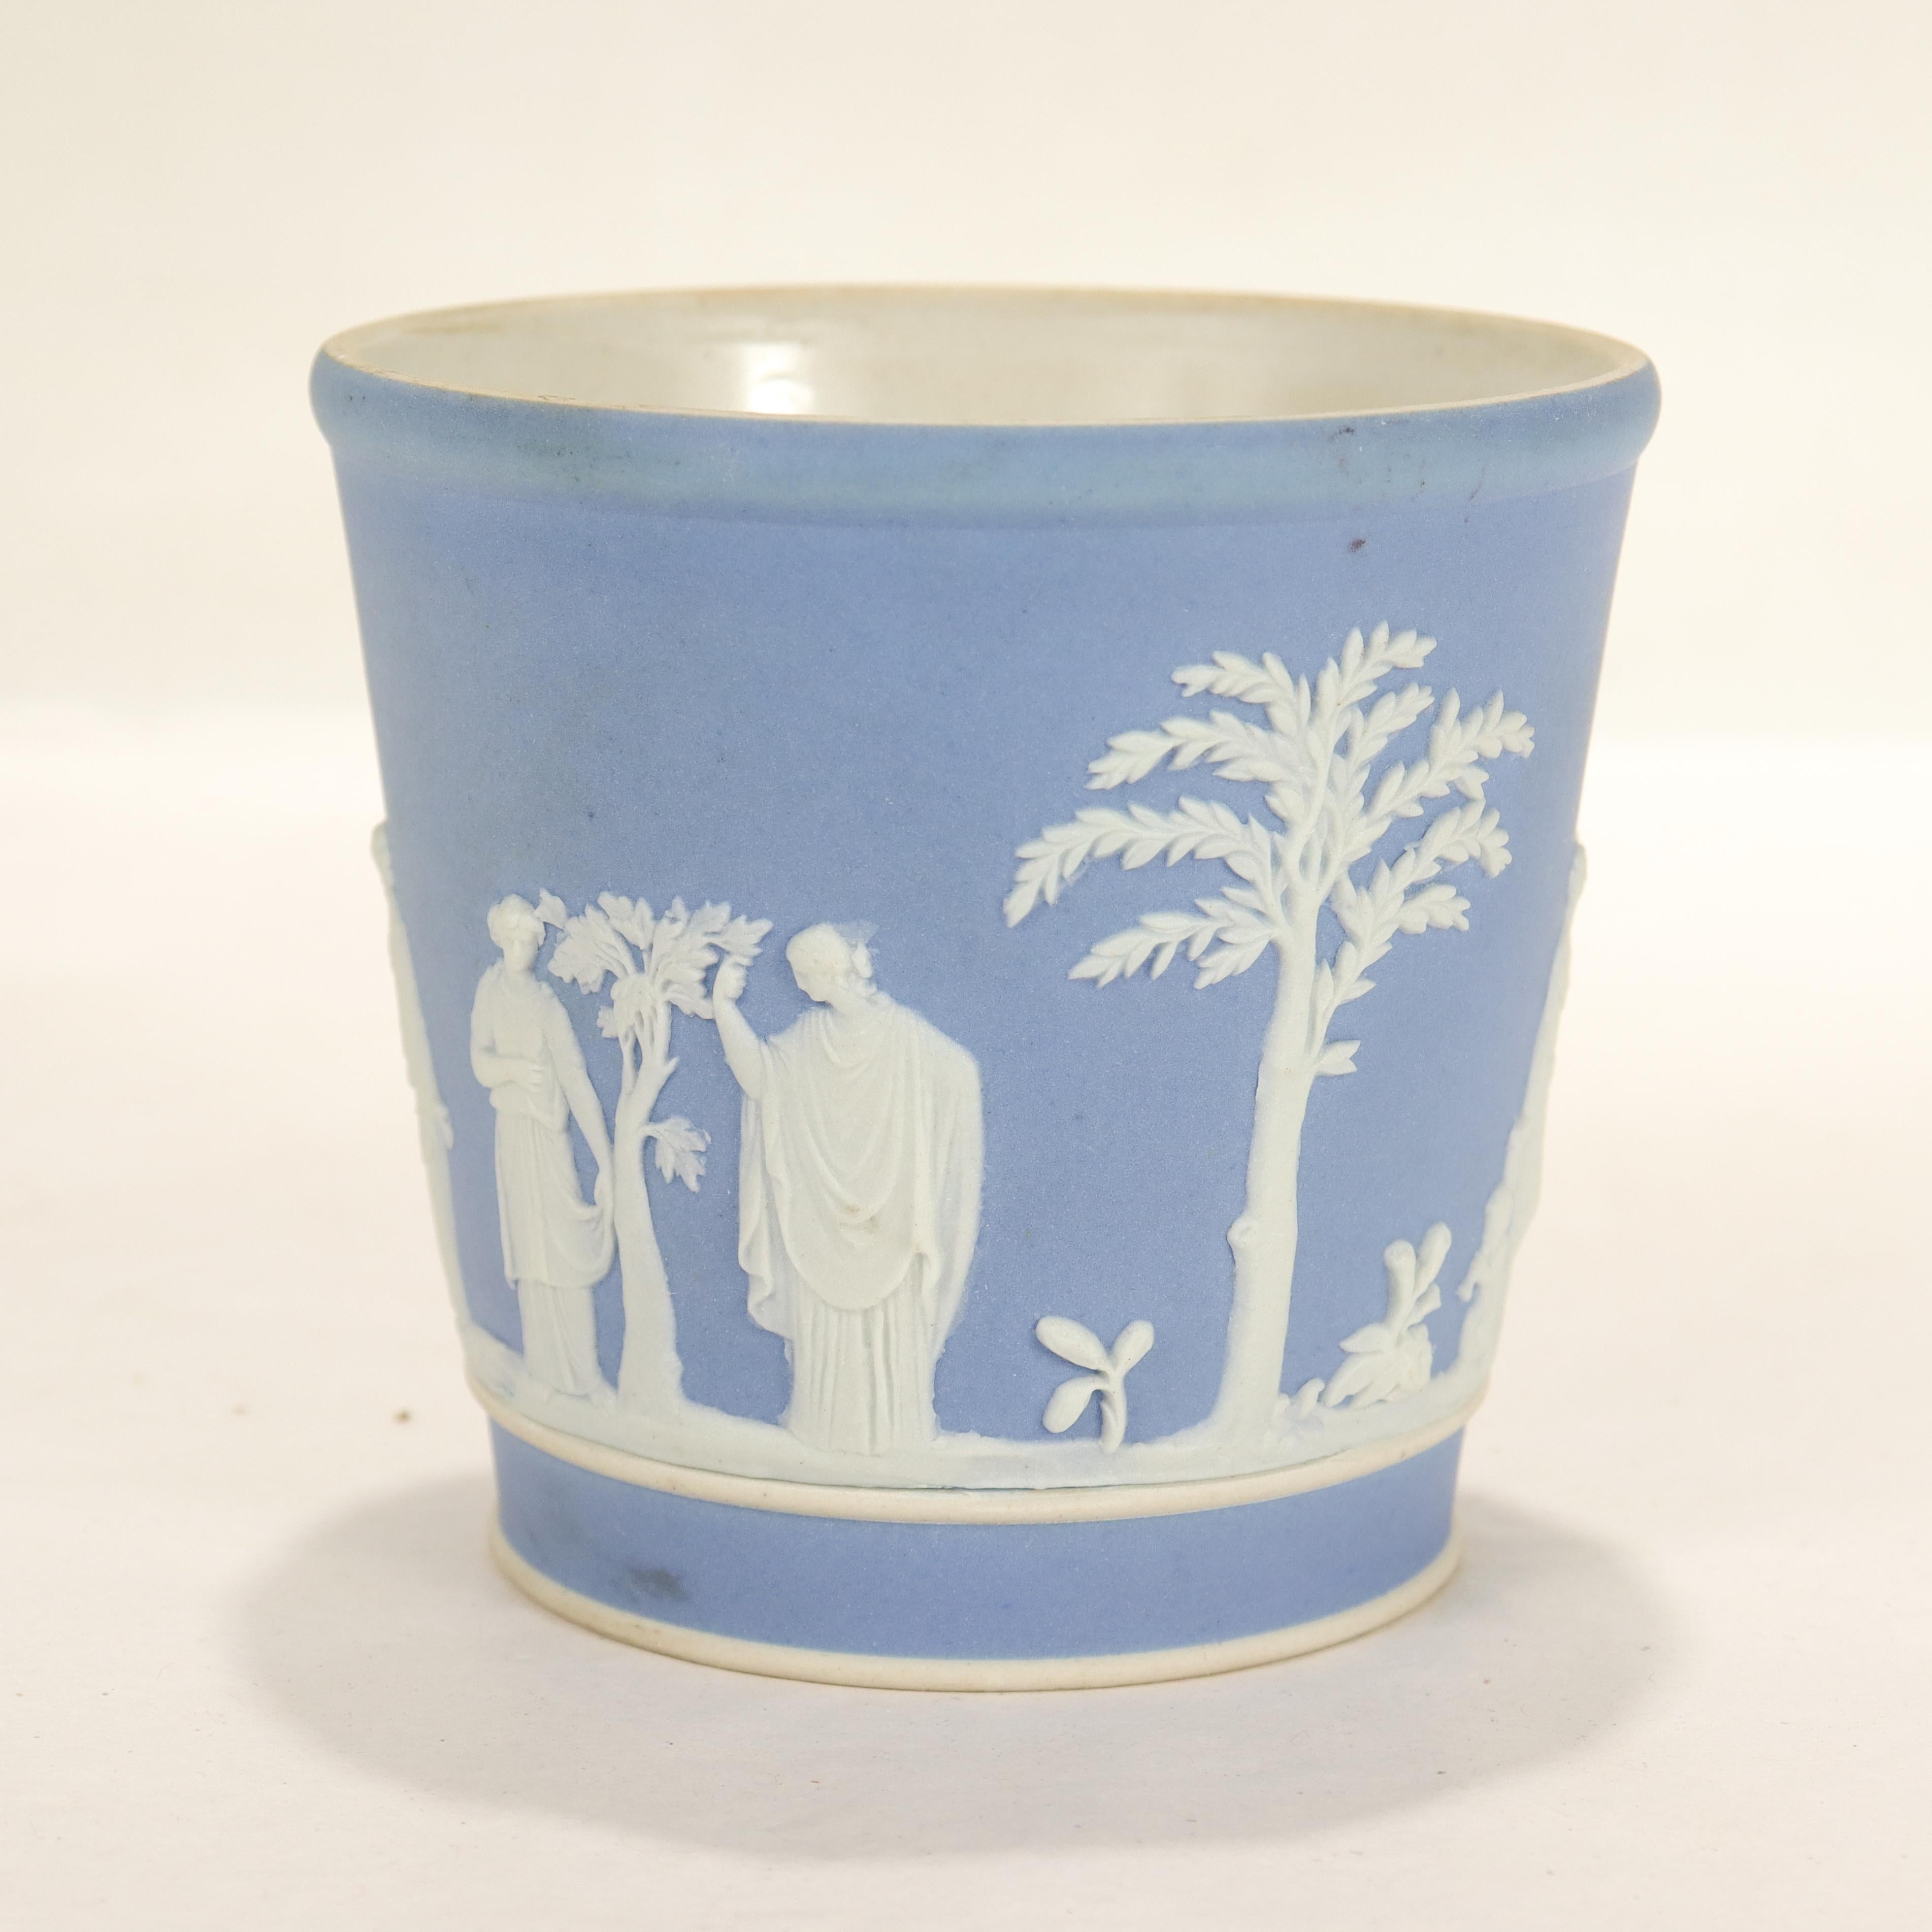 A fine antique Jasperware beaker or cup.

In Wedgwood blue with white relief decoration depicting men, women, children, and trees in a Classical style.

We assume this was used as a tumbler or drinking vessel.

Simply a wonderful Jasperware